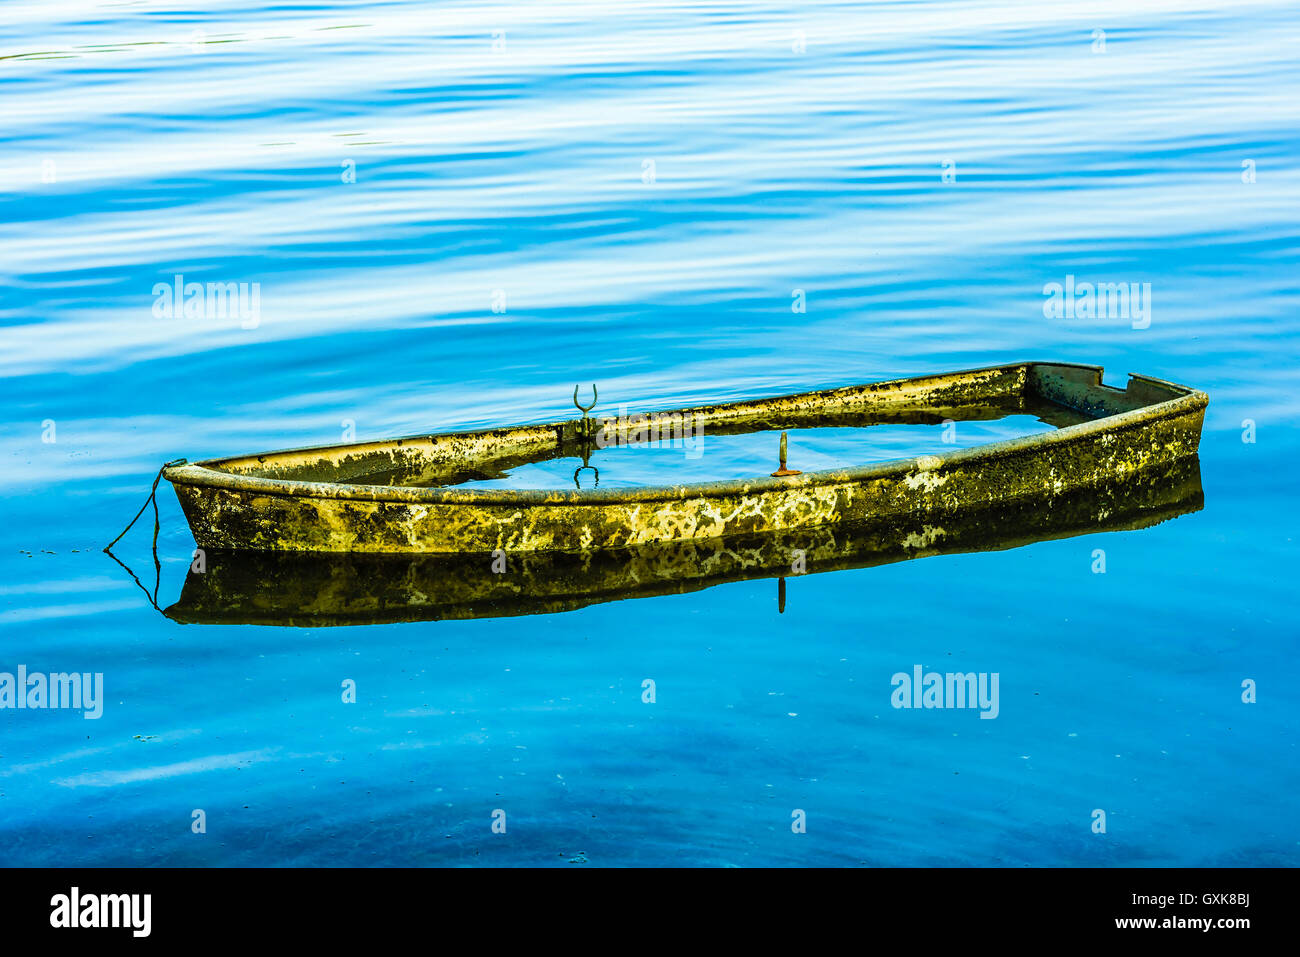 Small abandoned boat almost completely submerged in the seawater. Stock Photo